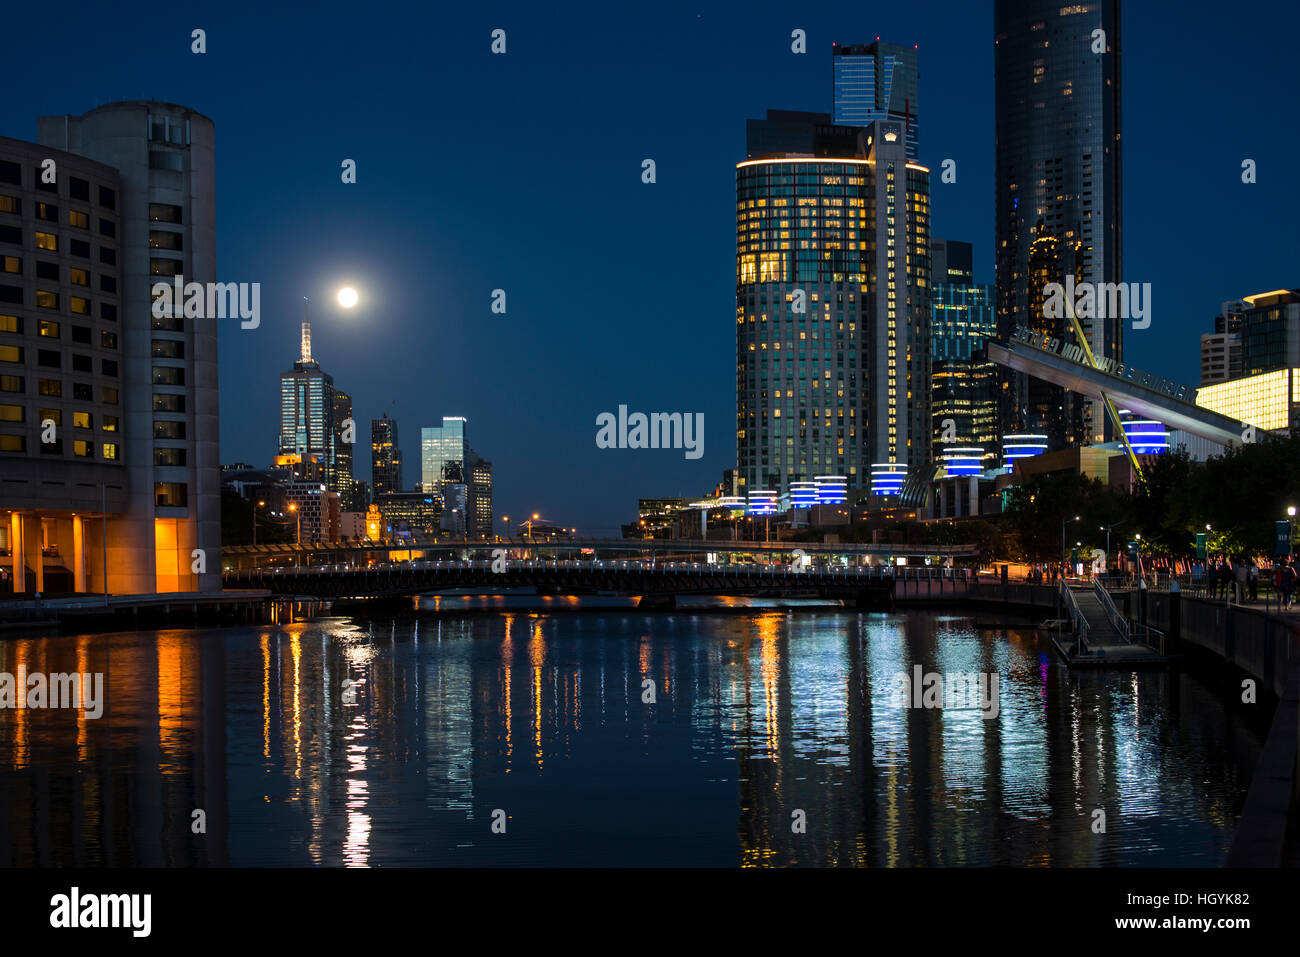 River Yarra, Melbourne, at night Stock Photo